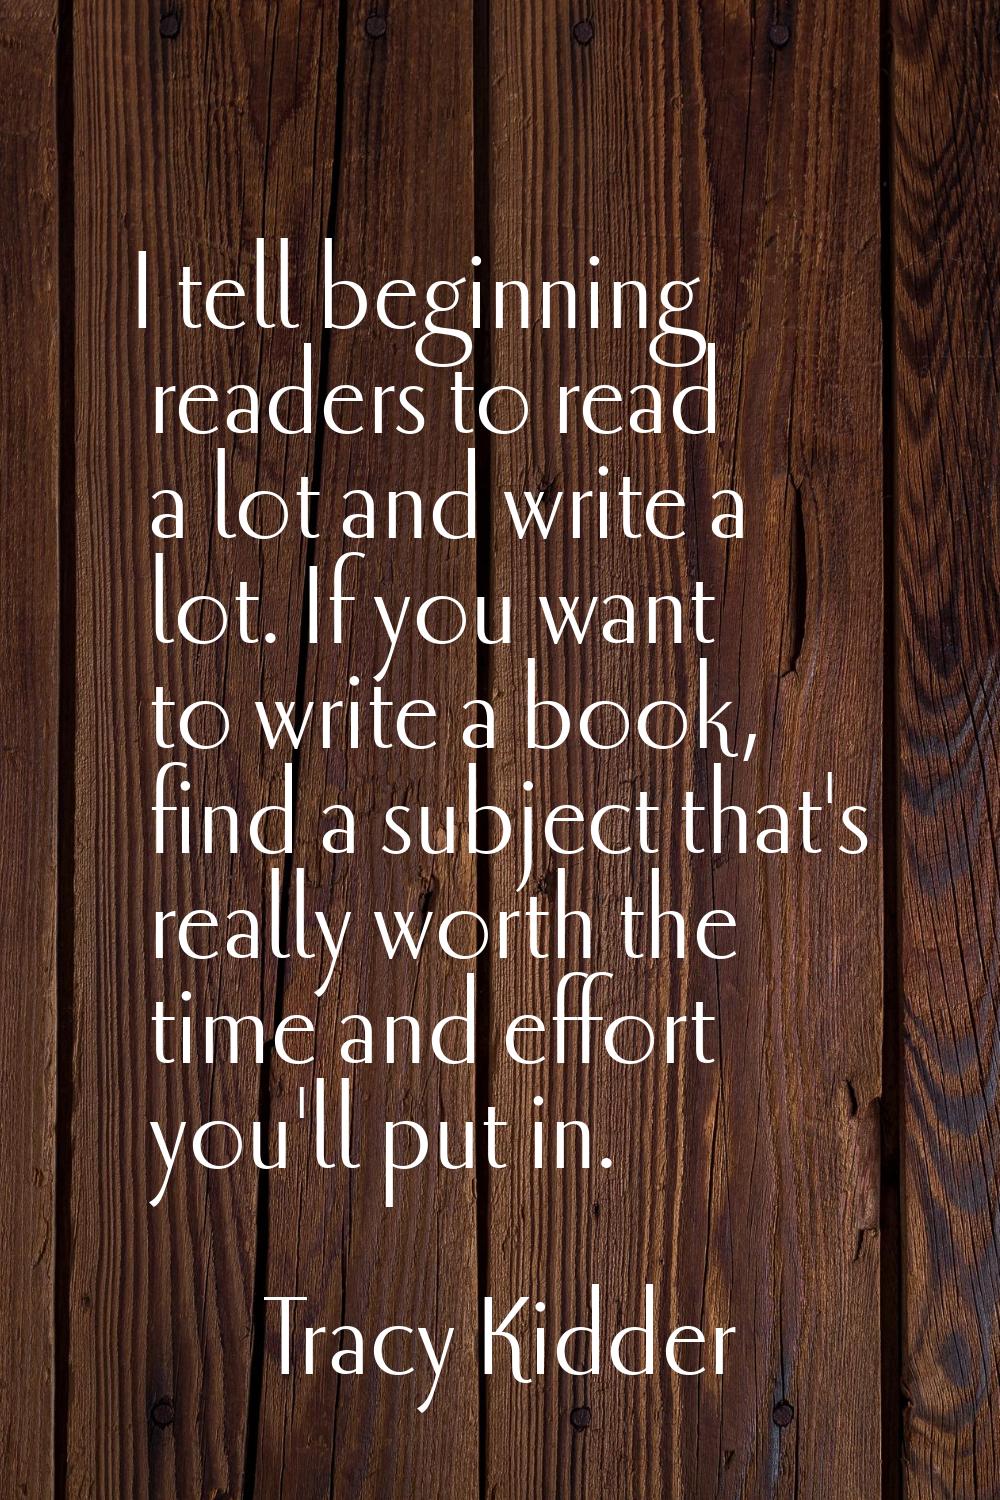 I tell beginning readers to read a lot and write a lot. If you want to write a book, find a subject